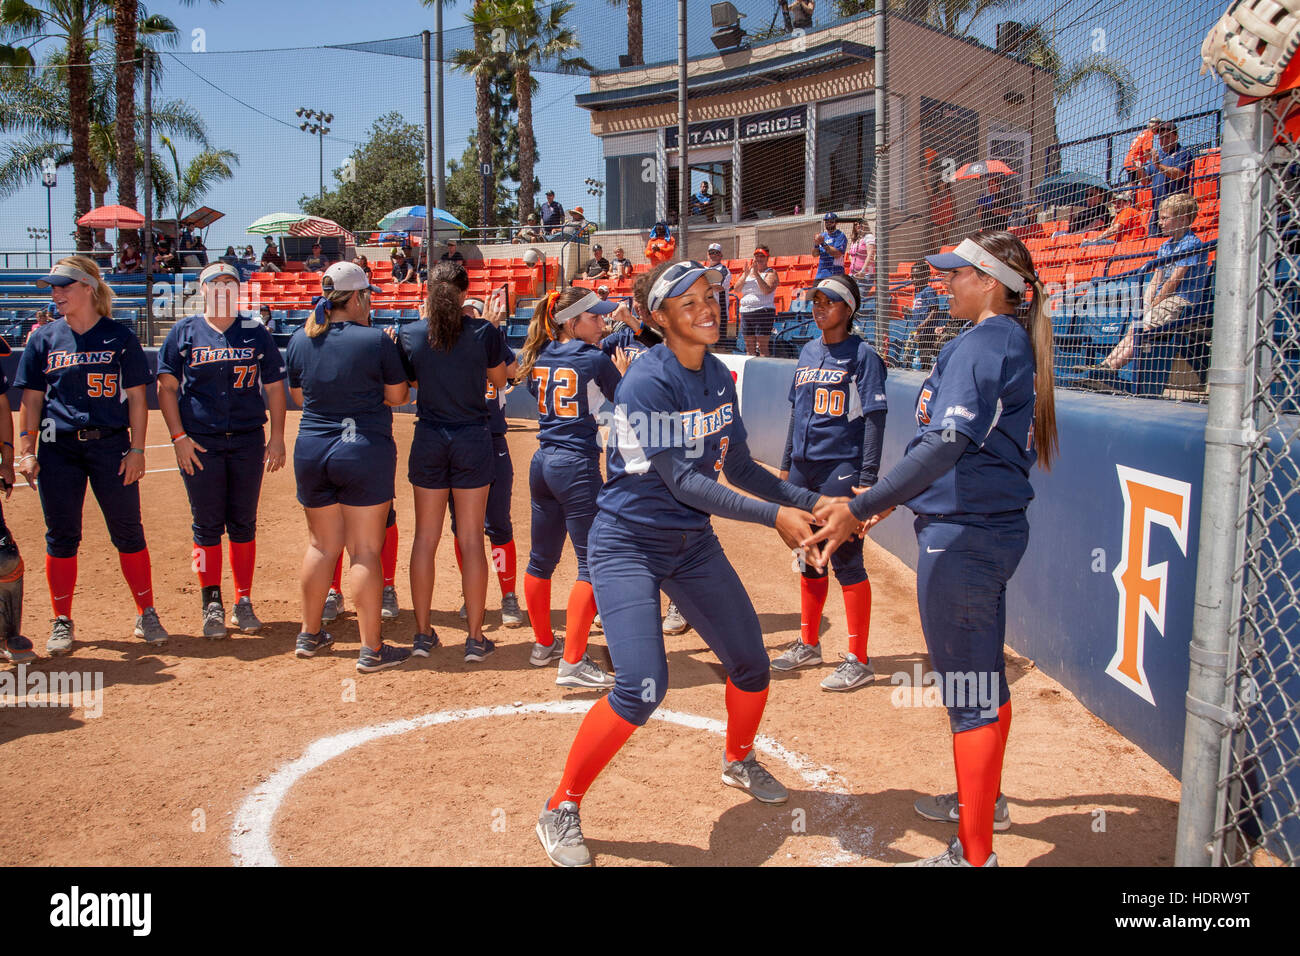 Multiracial college women's softball players prepare for a game on the field in Fullerton, CA. Stock Photo